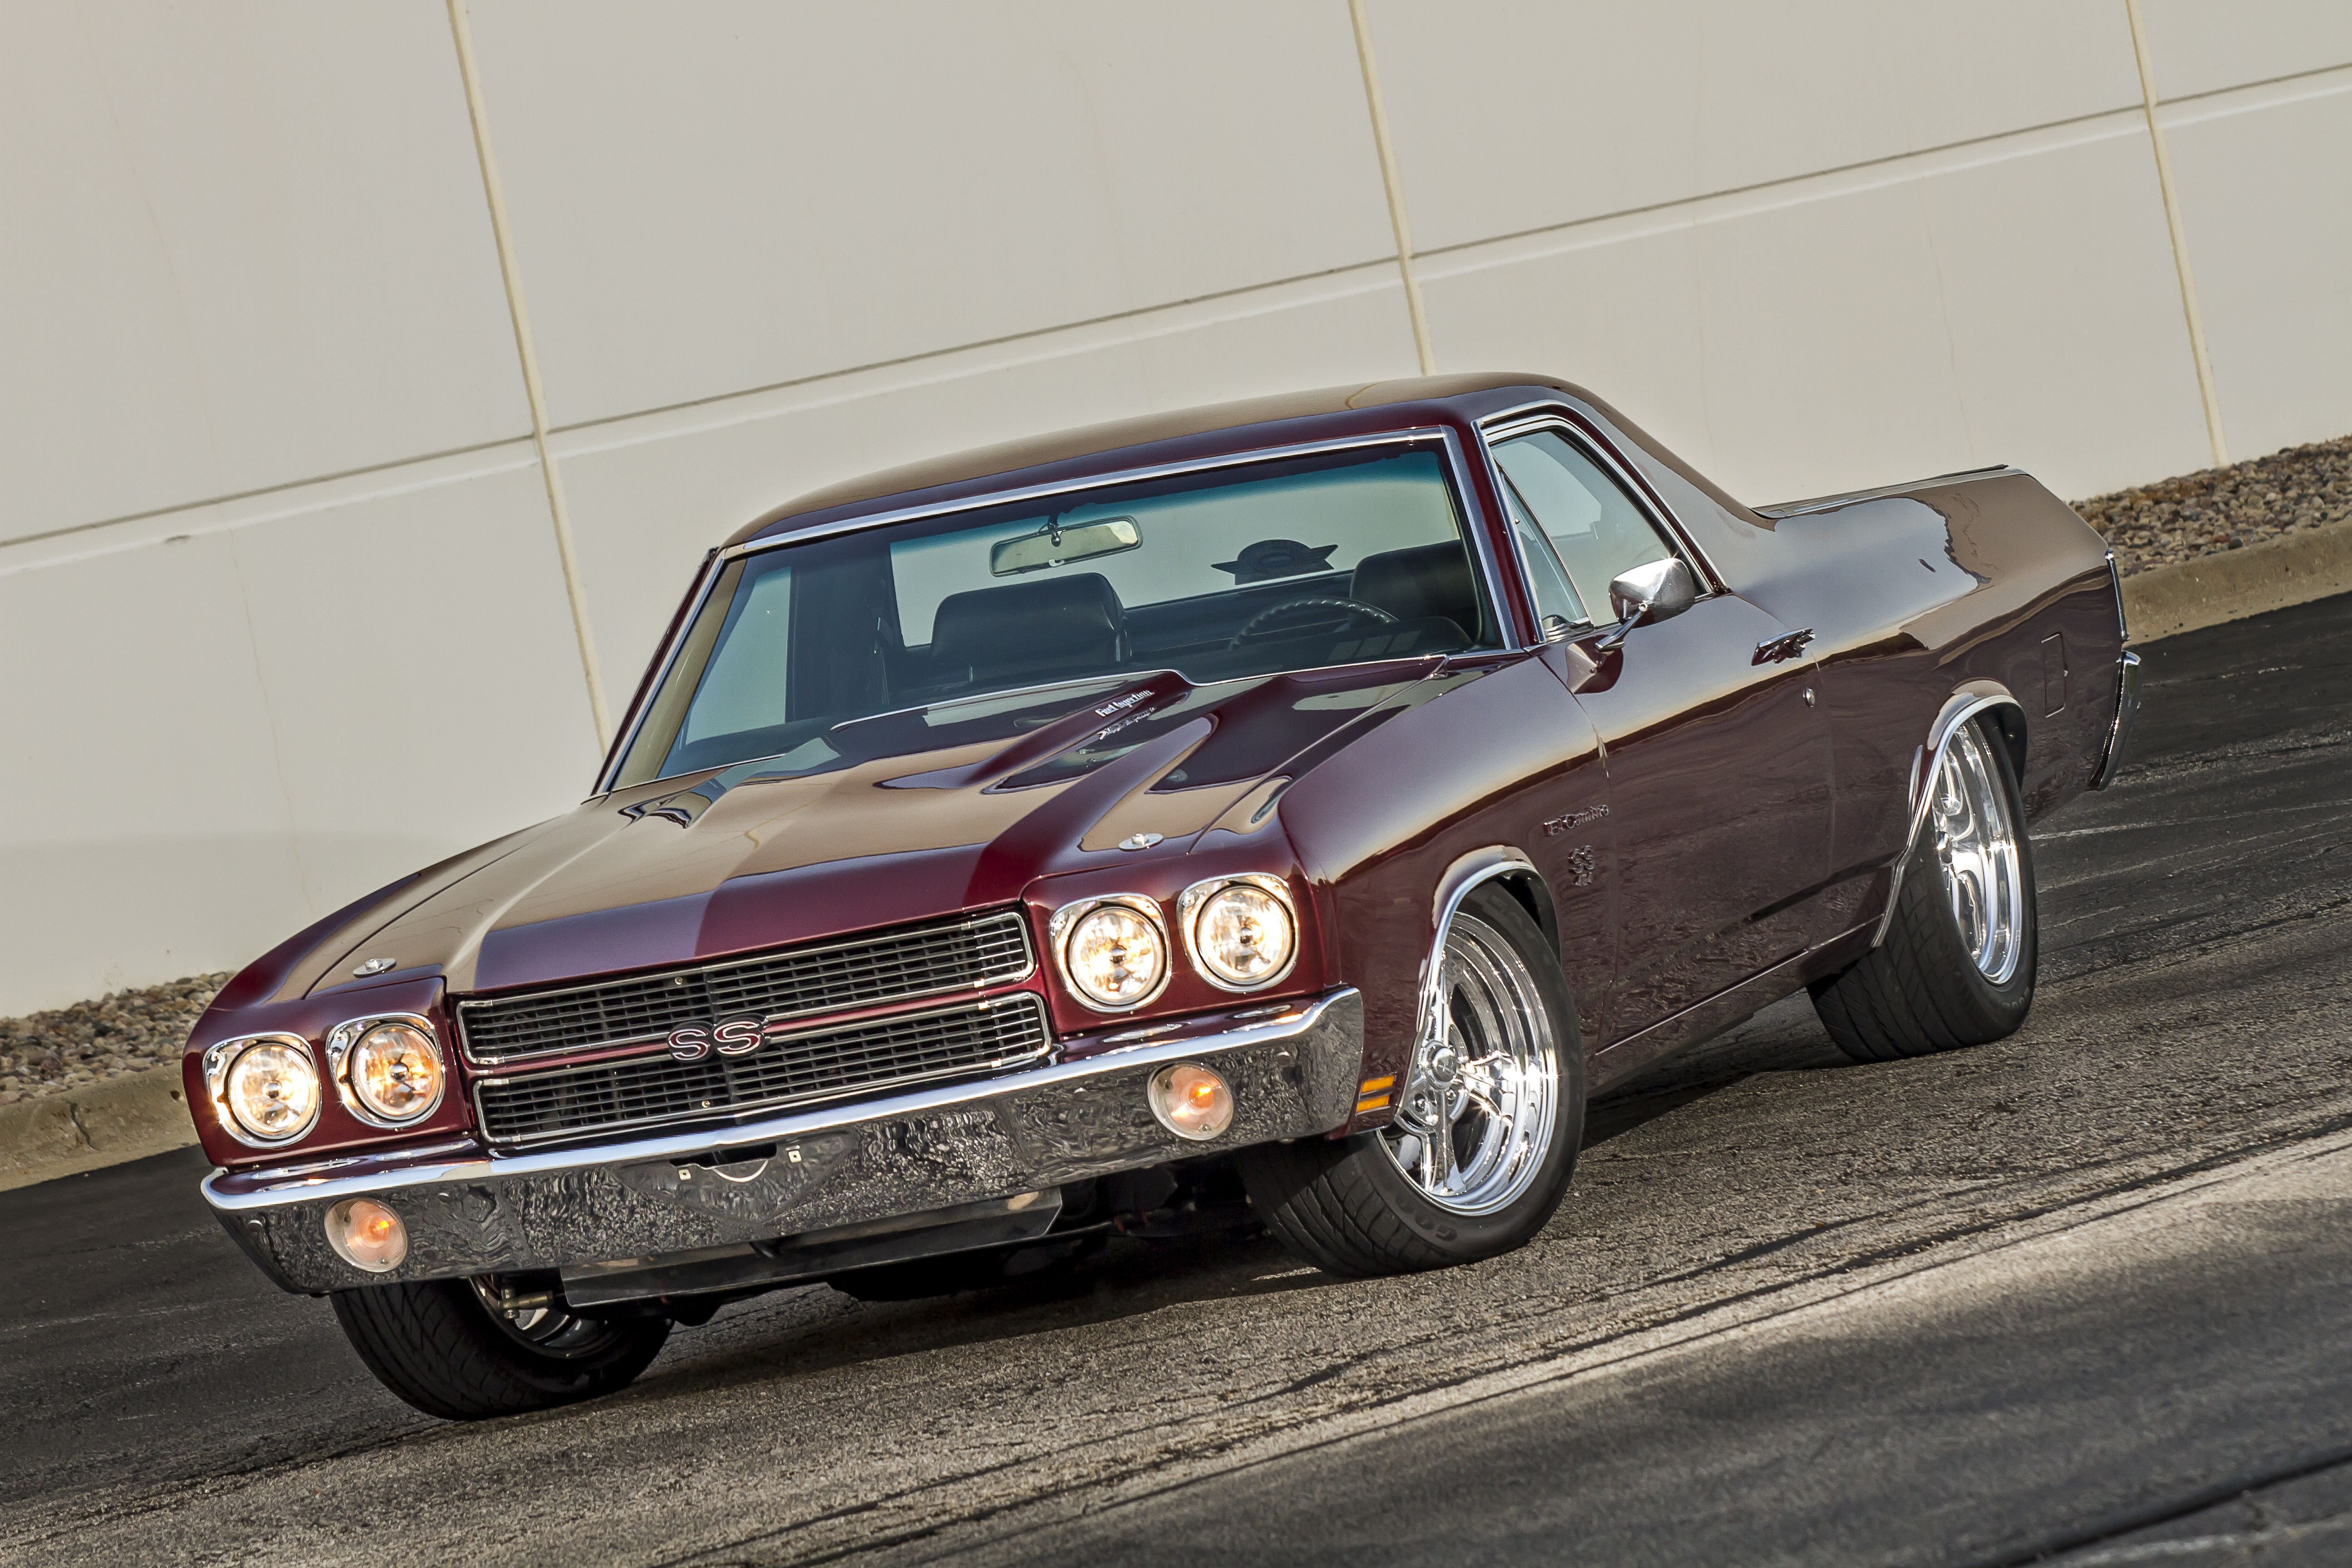 1970, 454, Ss, Chevrolet, El, Camino, Muscle, Classic, Hot, Rod, Rods, Cust...